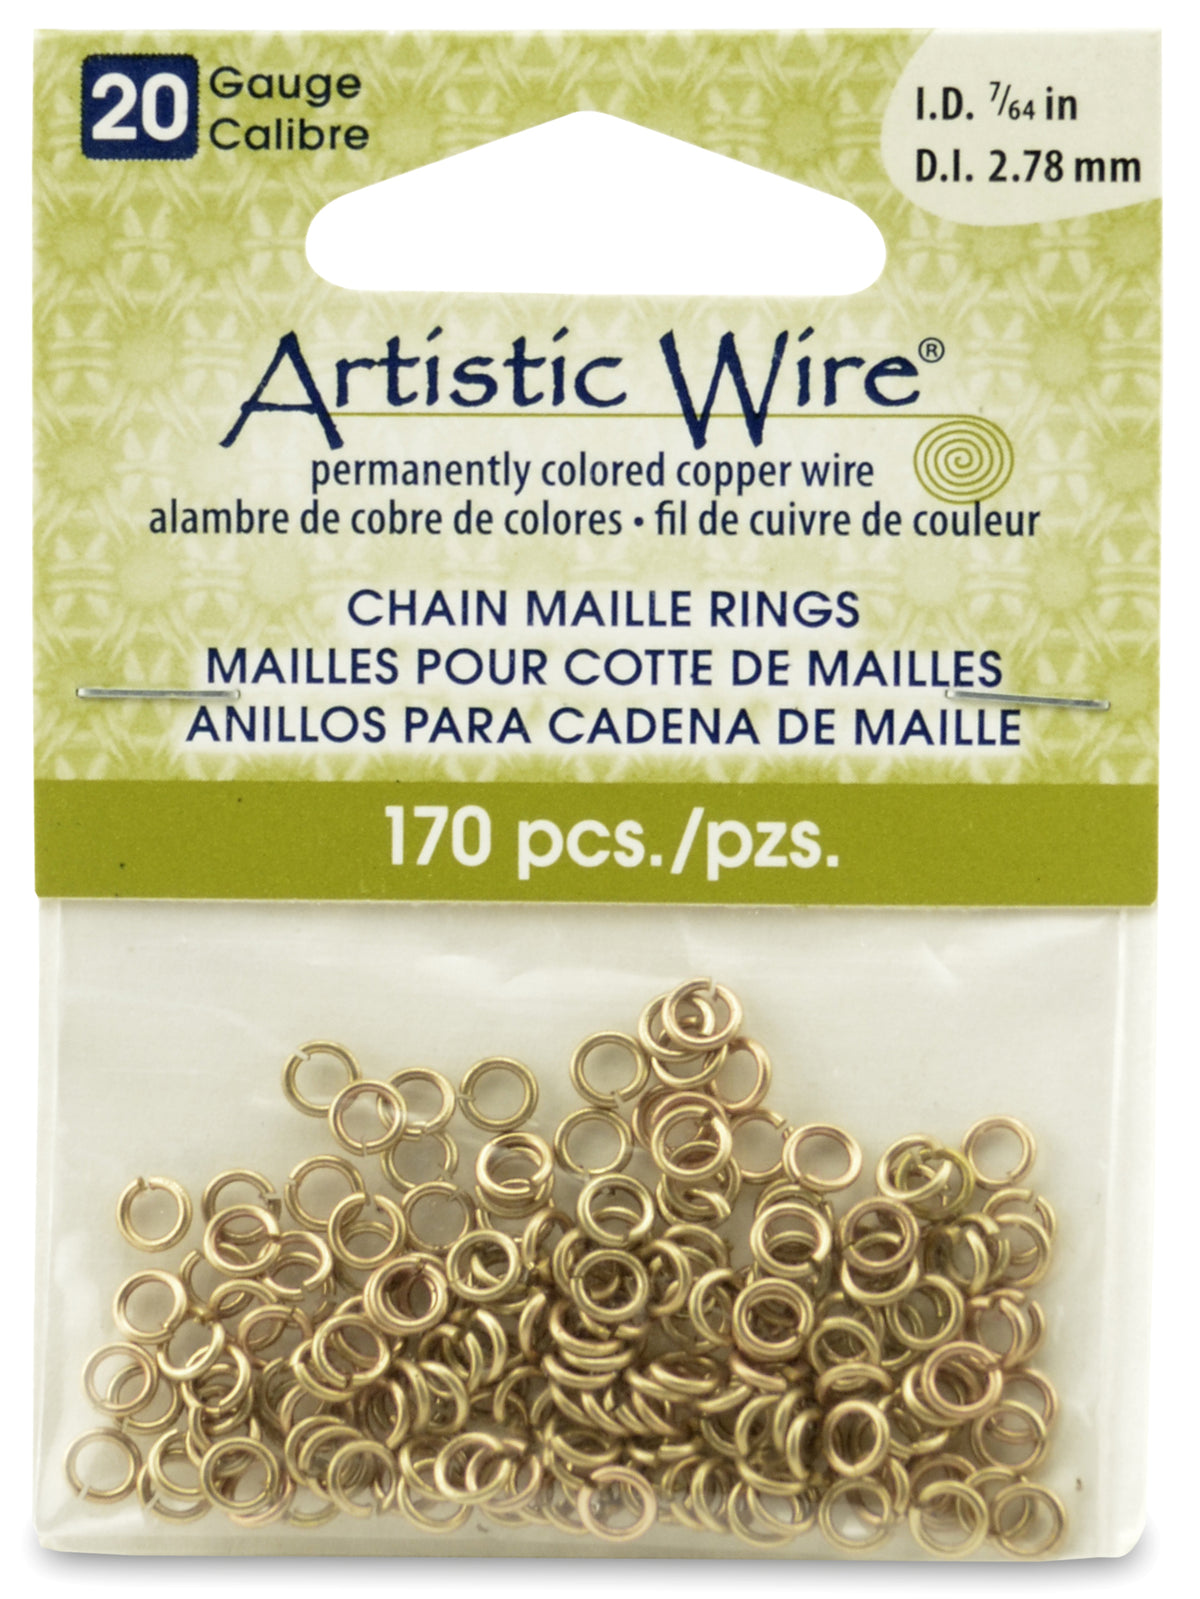 20 Gauge Artistic Wire, Chain Maille Rings, Round, Tarnish Resistant Brass, 7/64 in (2.78 mm), 170 pc